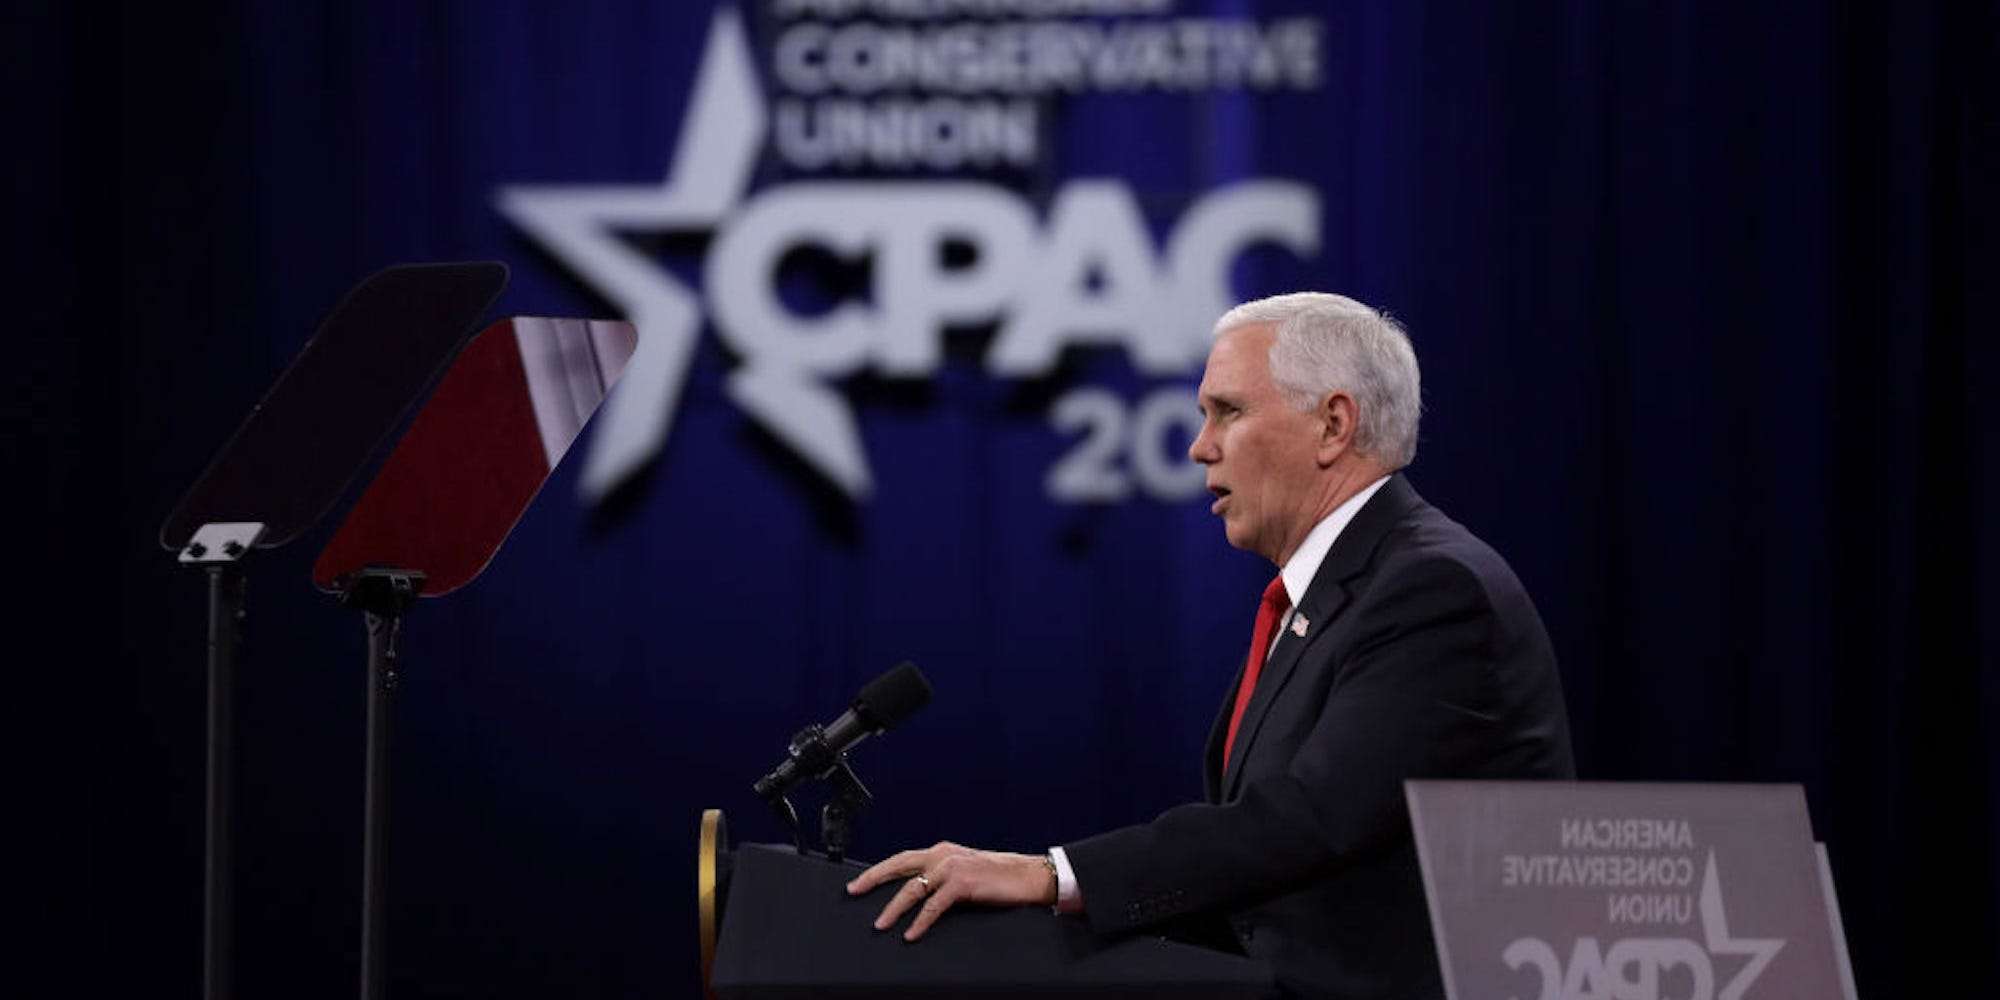 Mike Pence declined an invitation to CPAC, where Trump is the headline